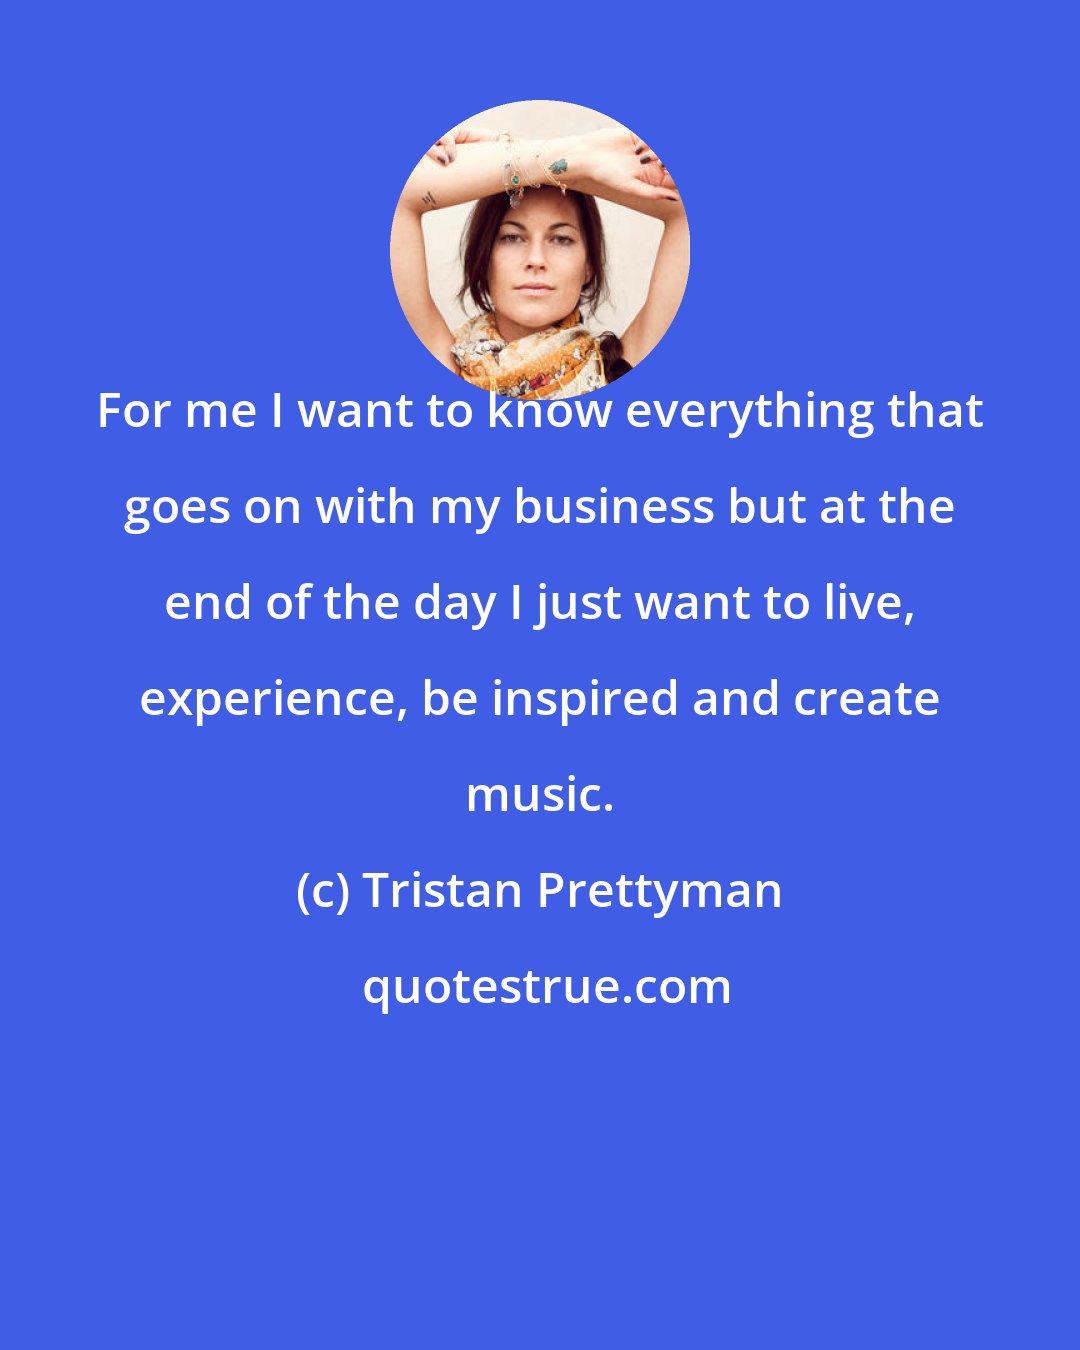 Tristan Prettyman: For me I want to know everything that goes on with my business but at the end of the day I just want to live, experience, be inspired and create music.